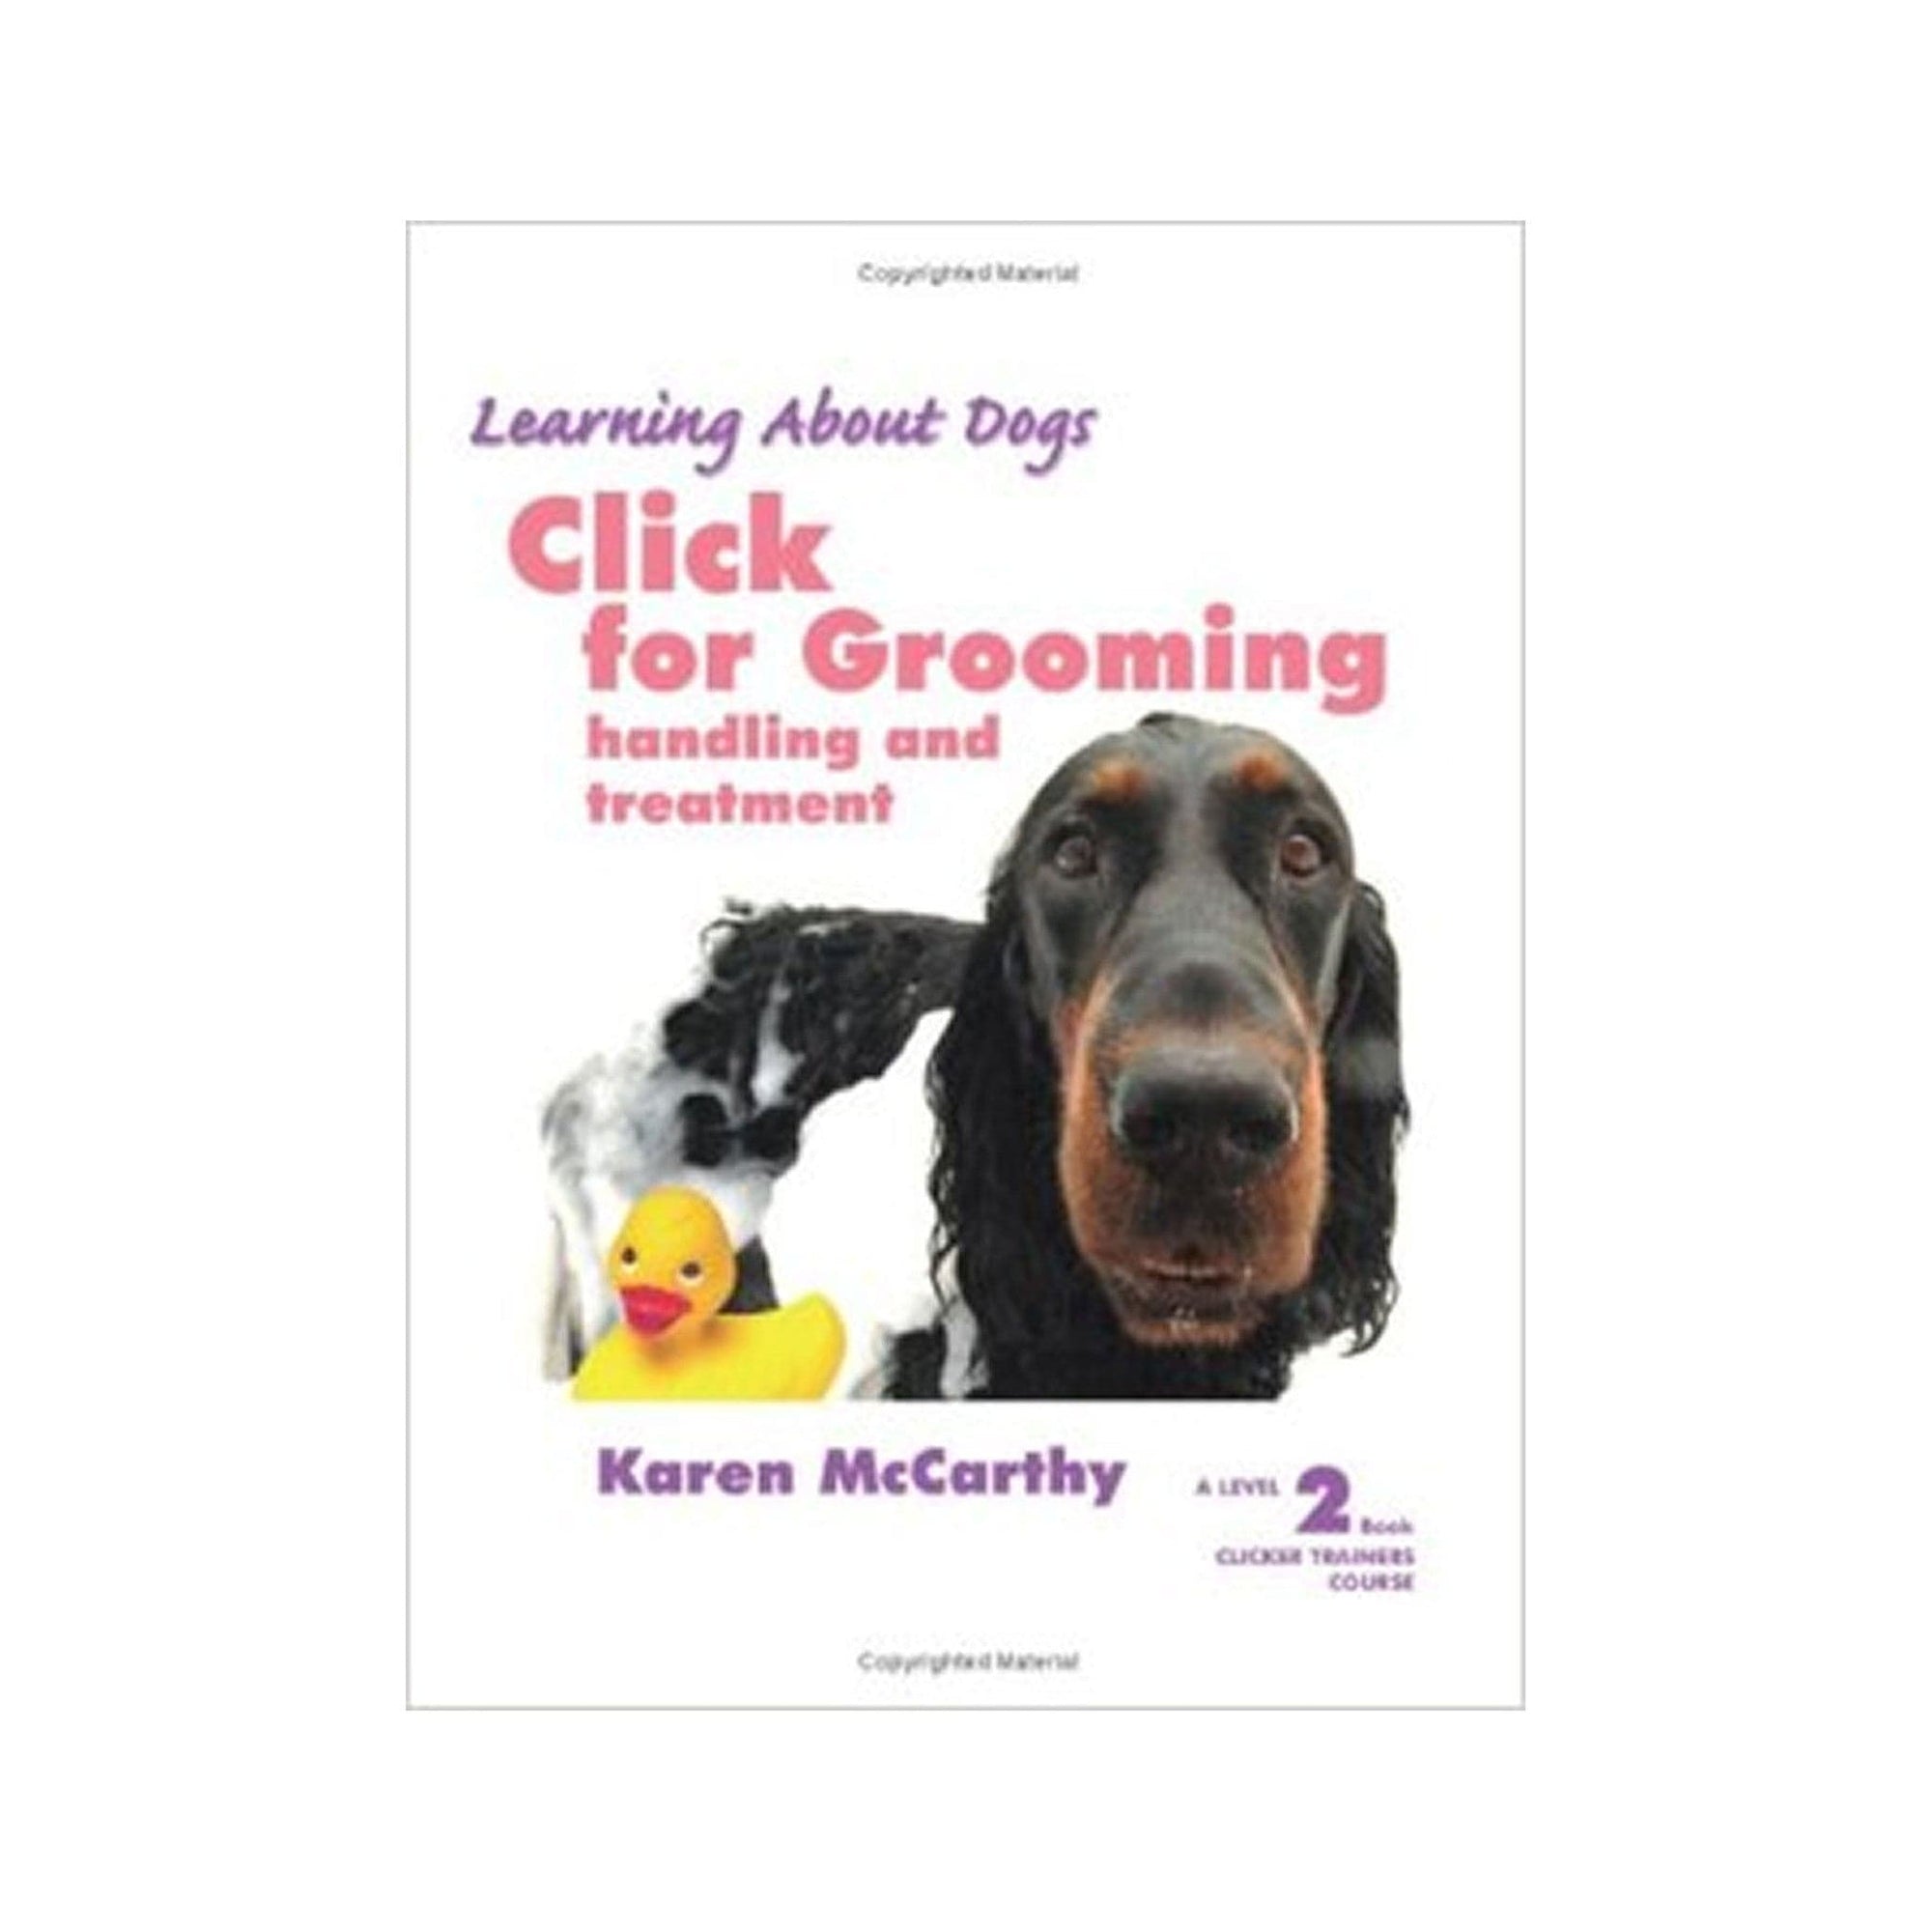 Click for Grooming: Handling and Treatment